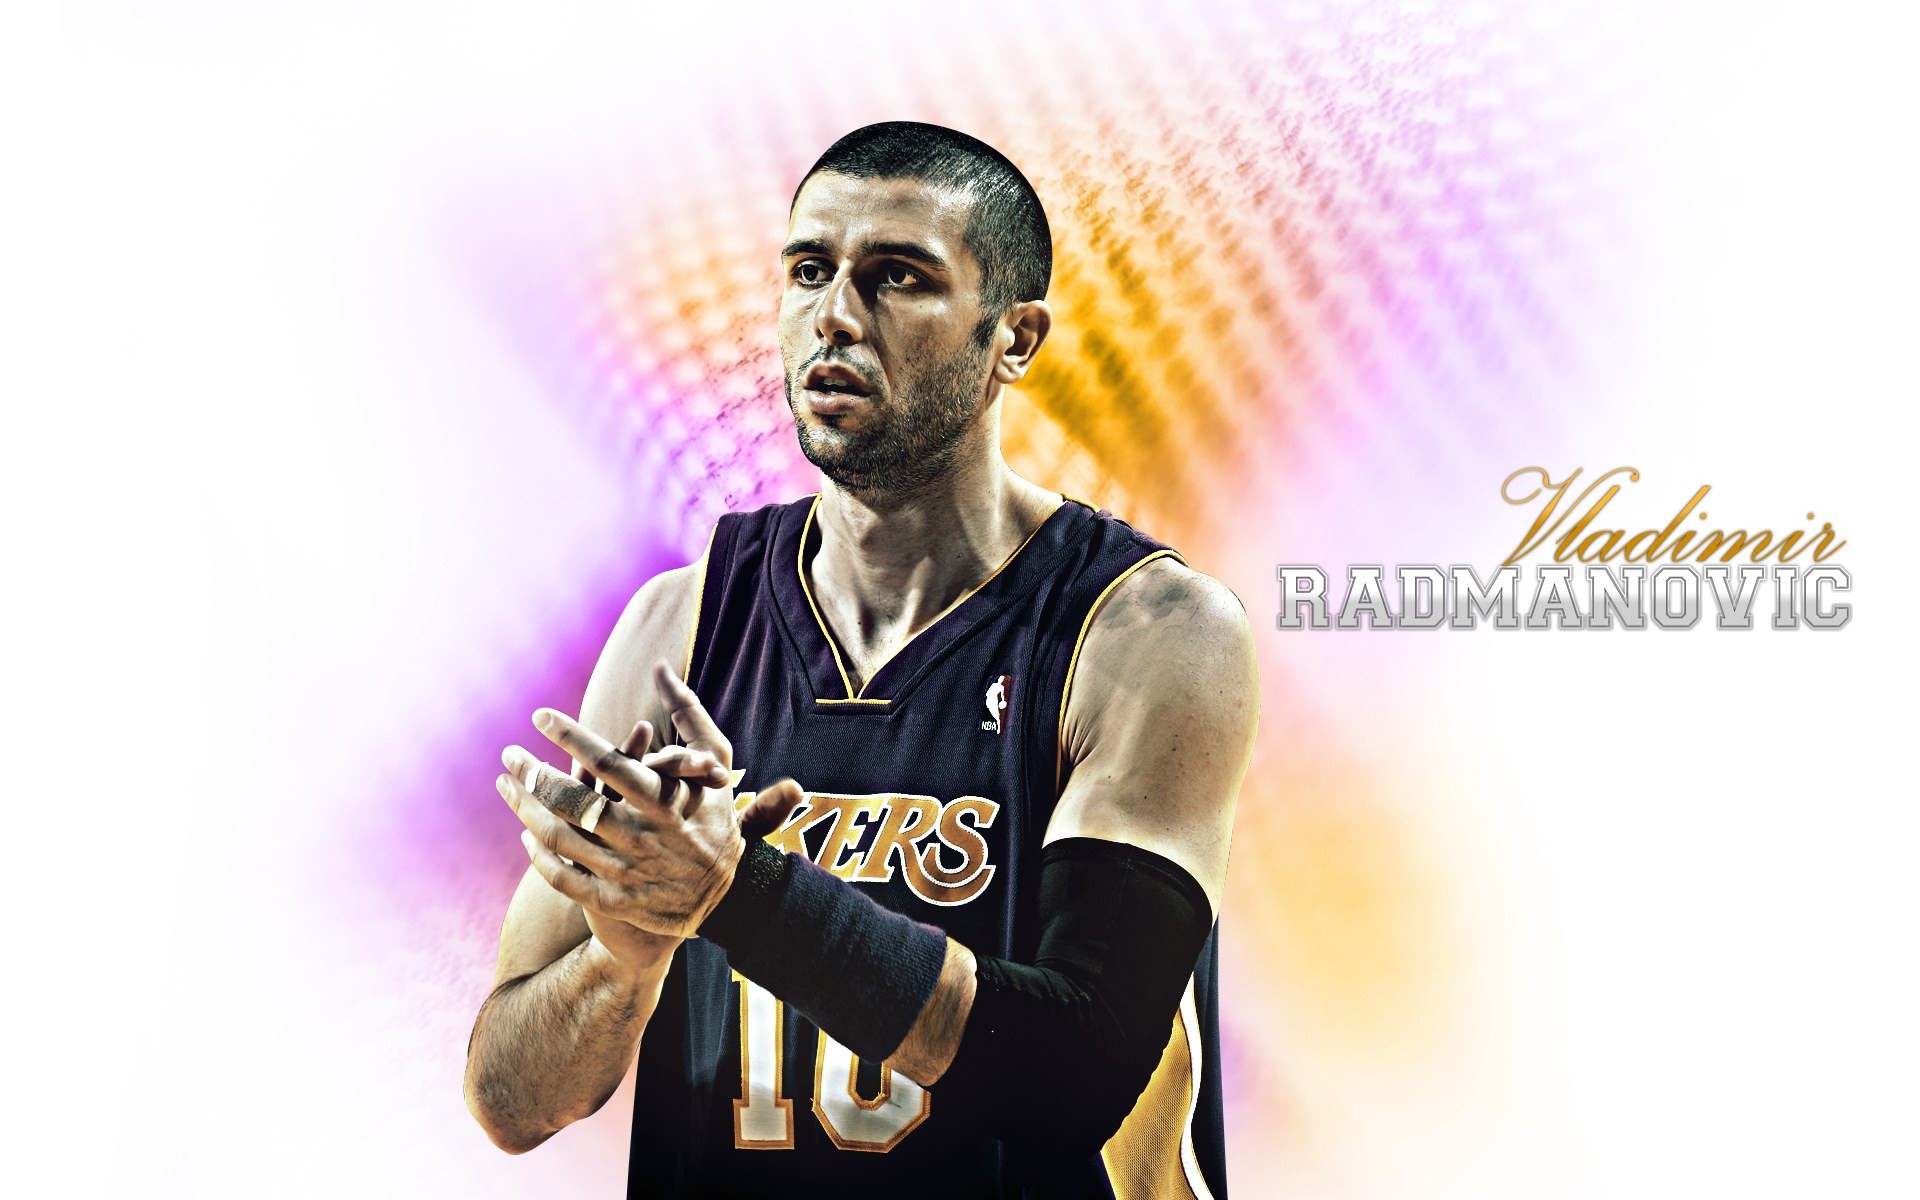 Los Angeles Lakers Wallpaper Oficial #29 - 1920x1200